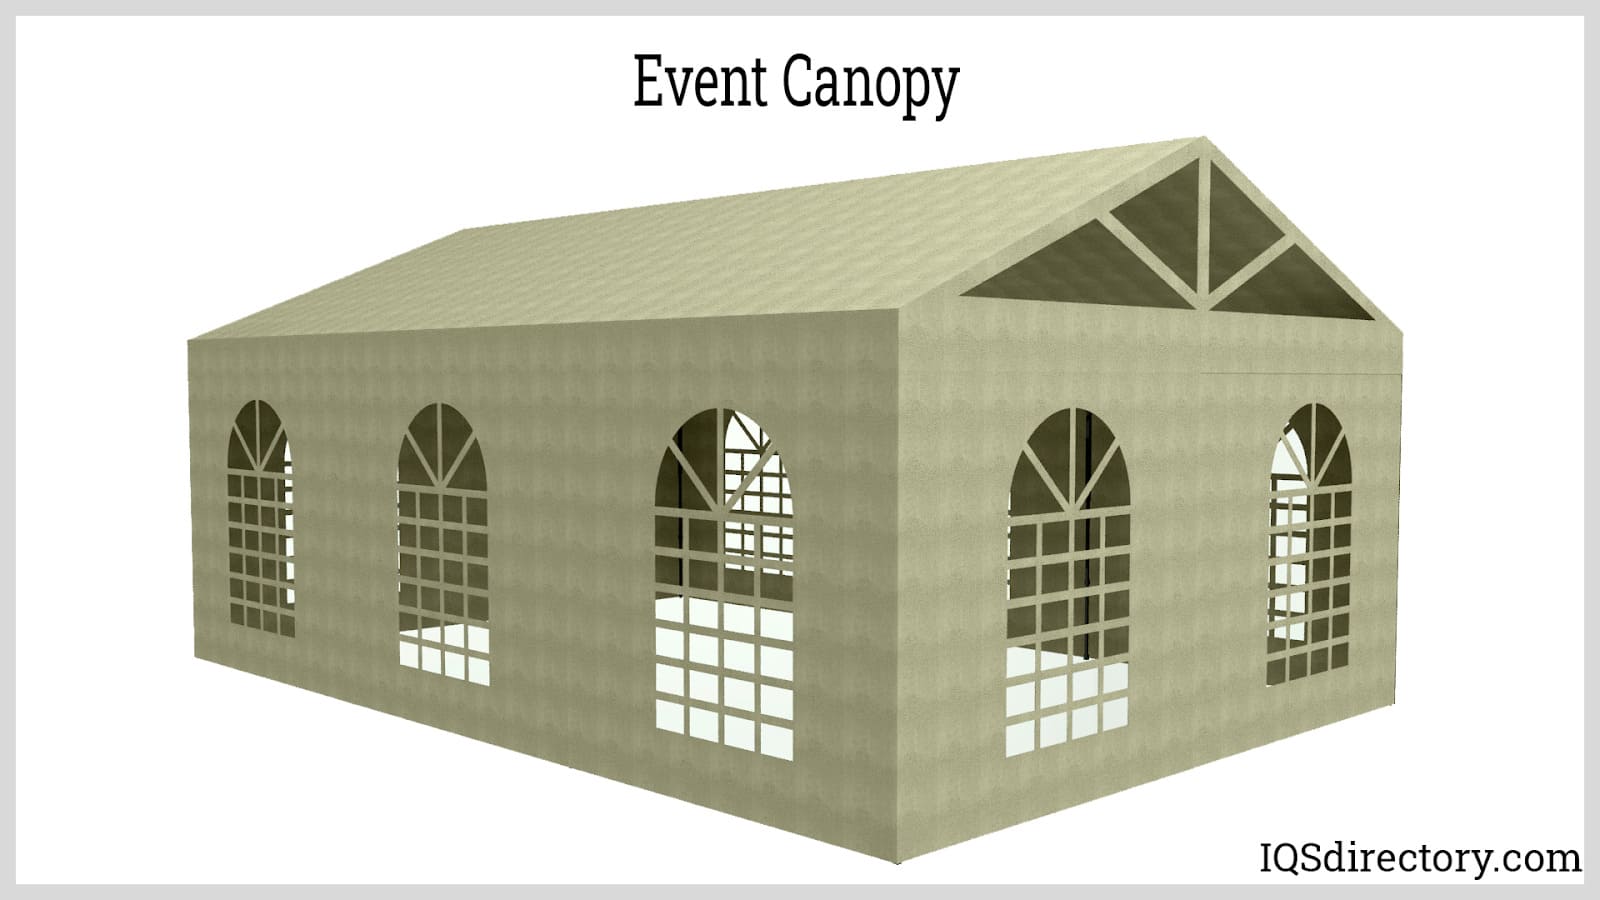 Event Canopy